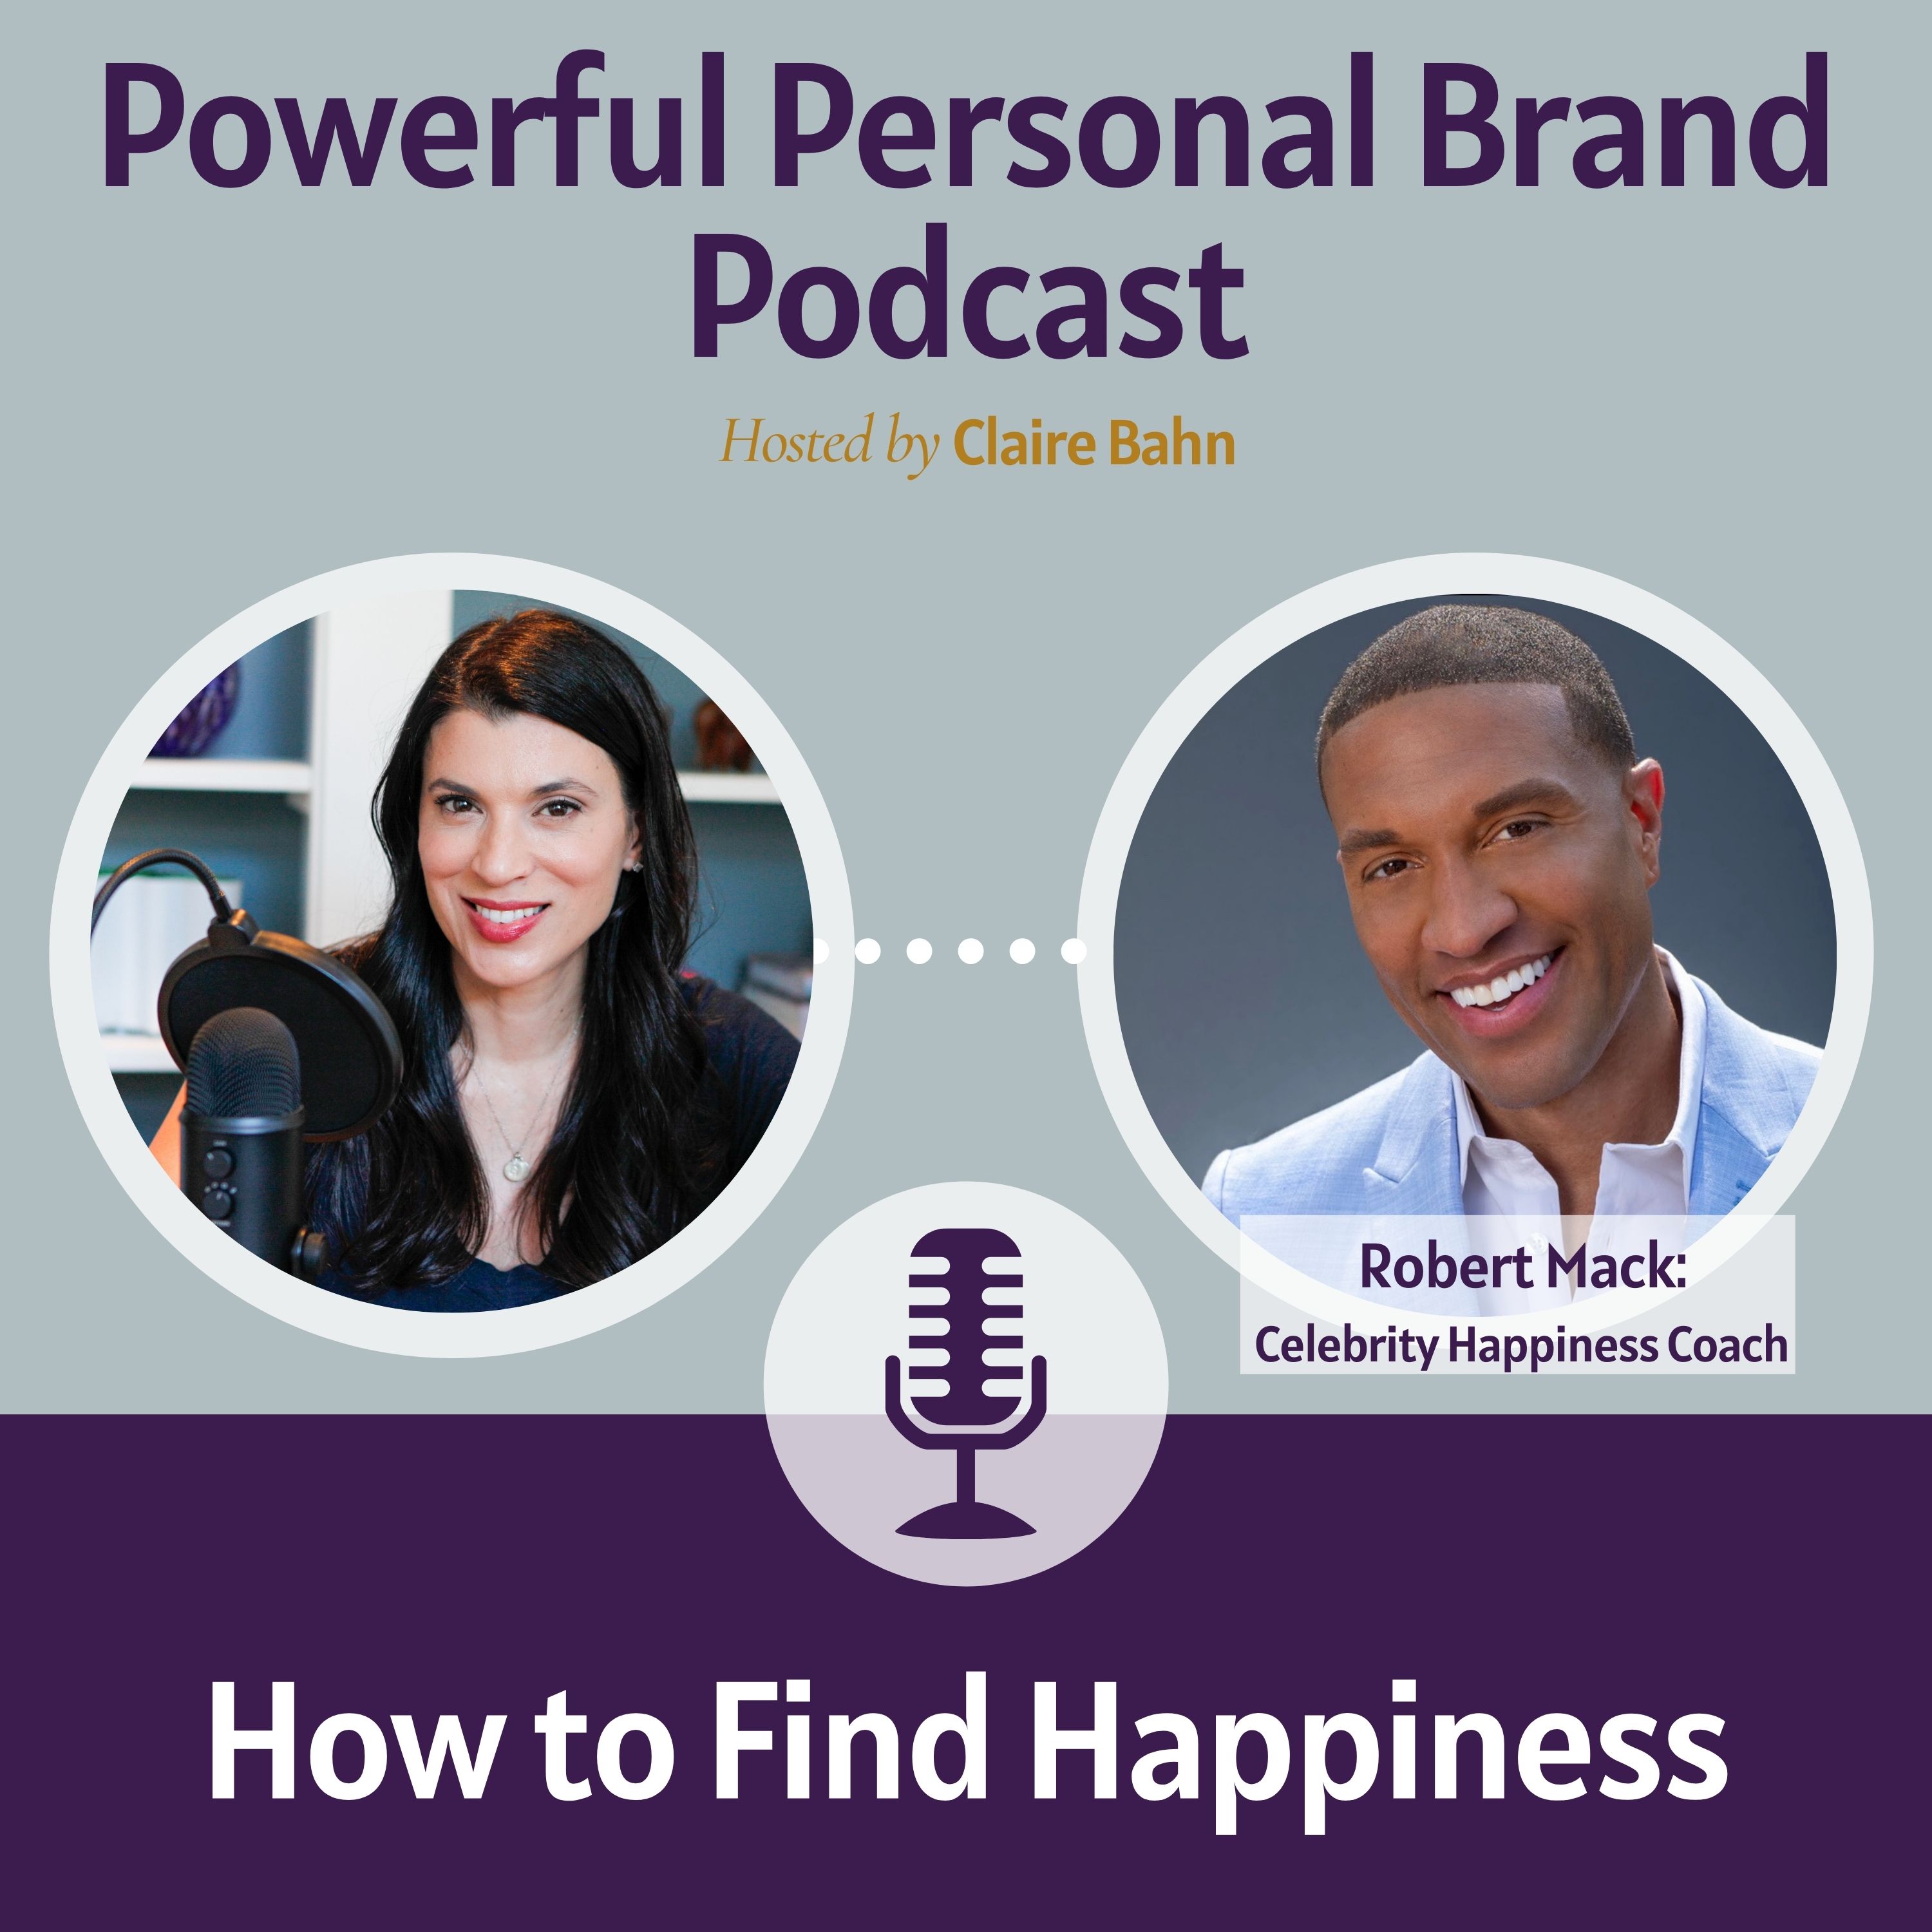 Artwork for podcast Powerful Personal Brand Podcast with Claire Bahn